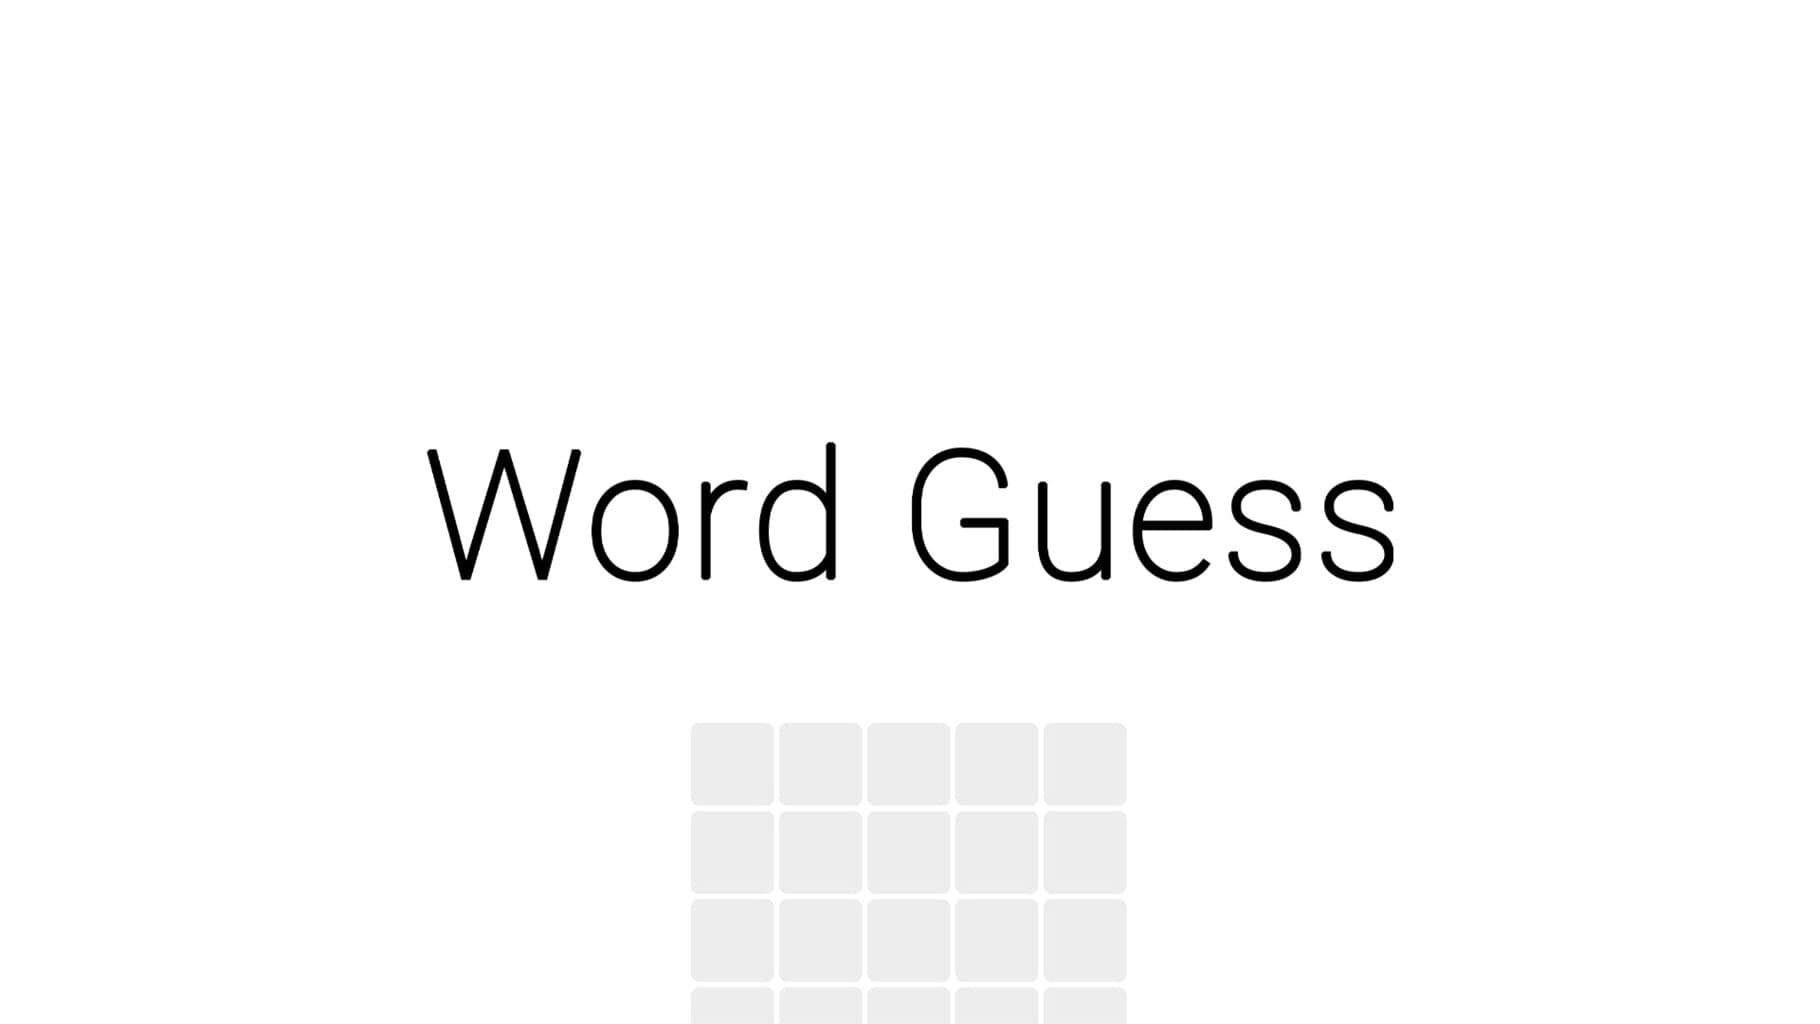 Word Guess Image